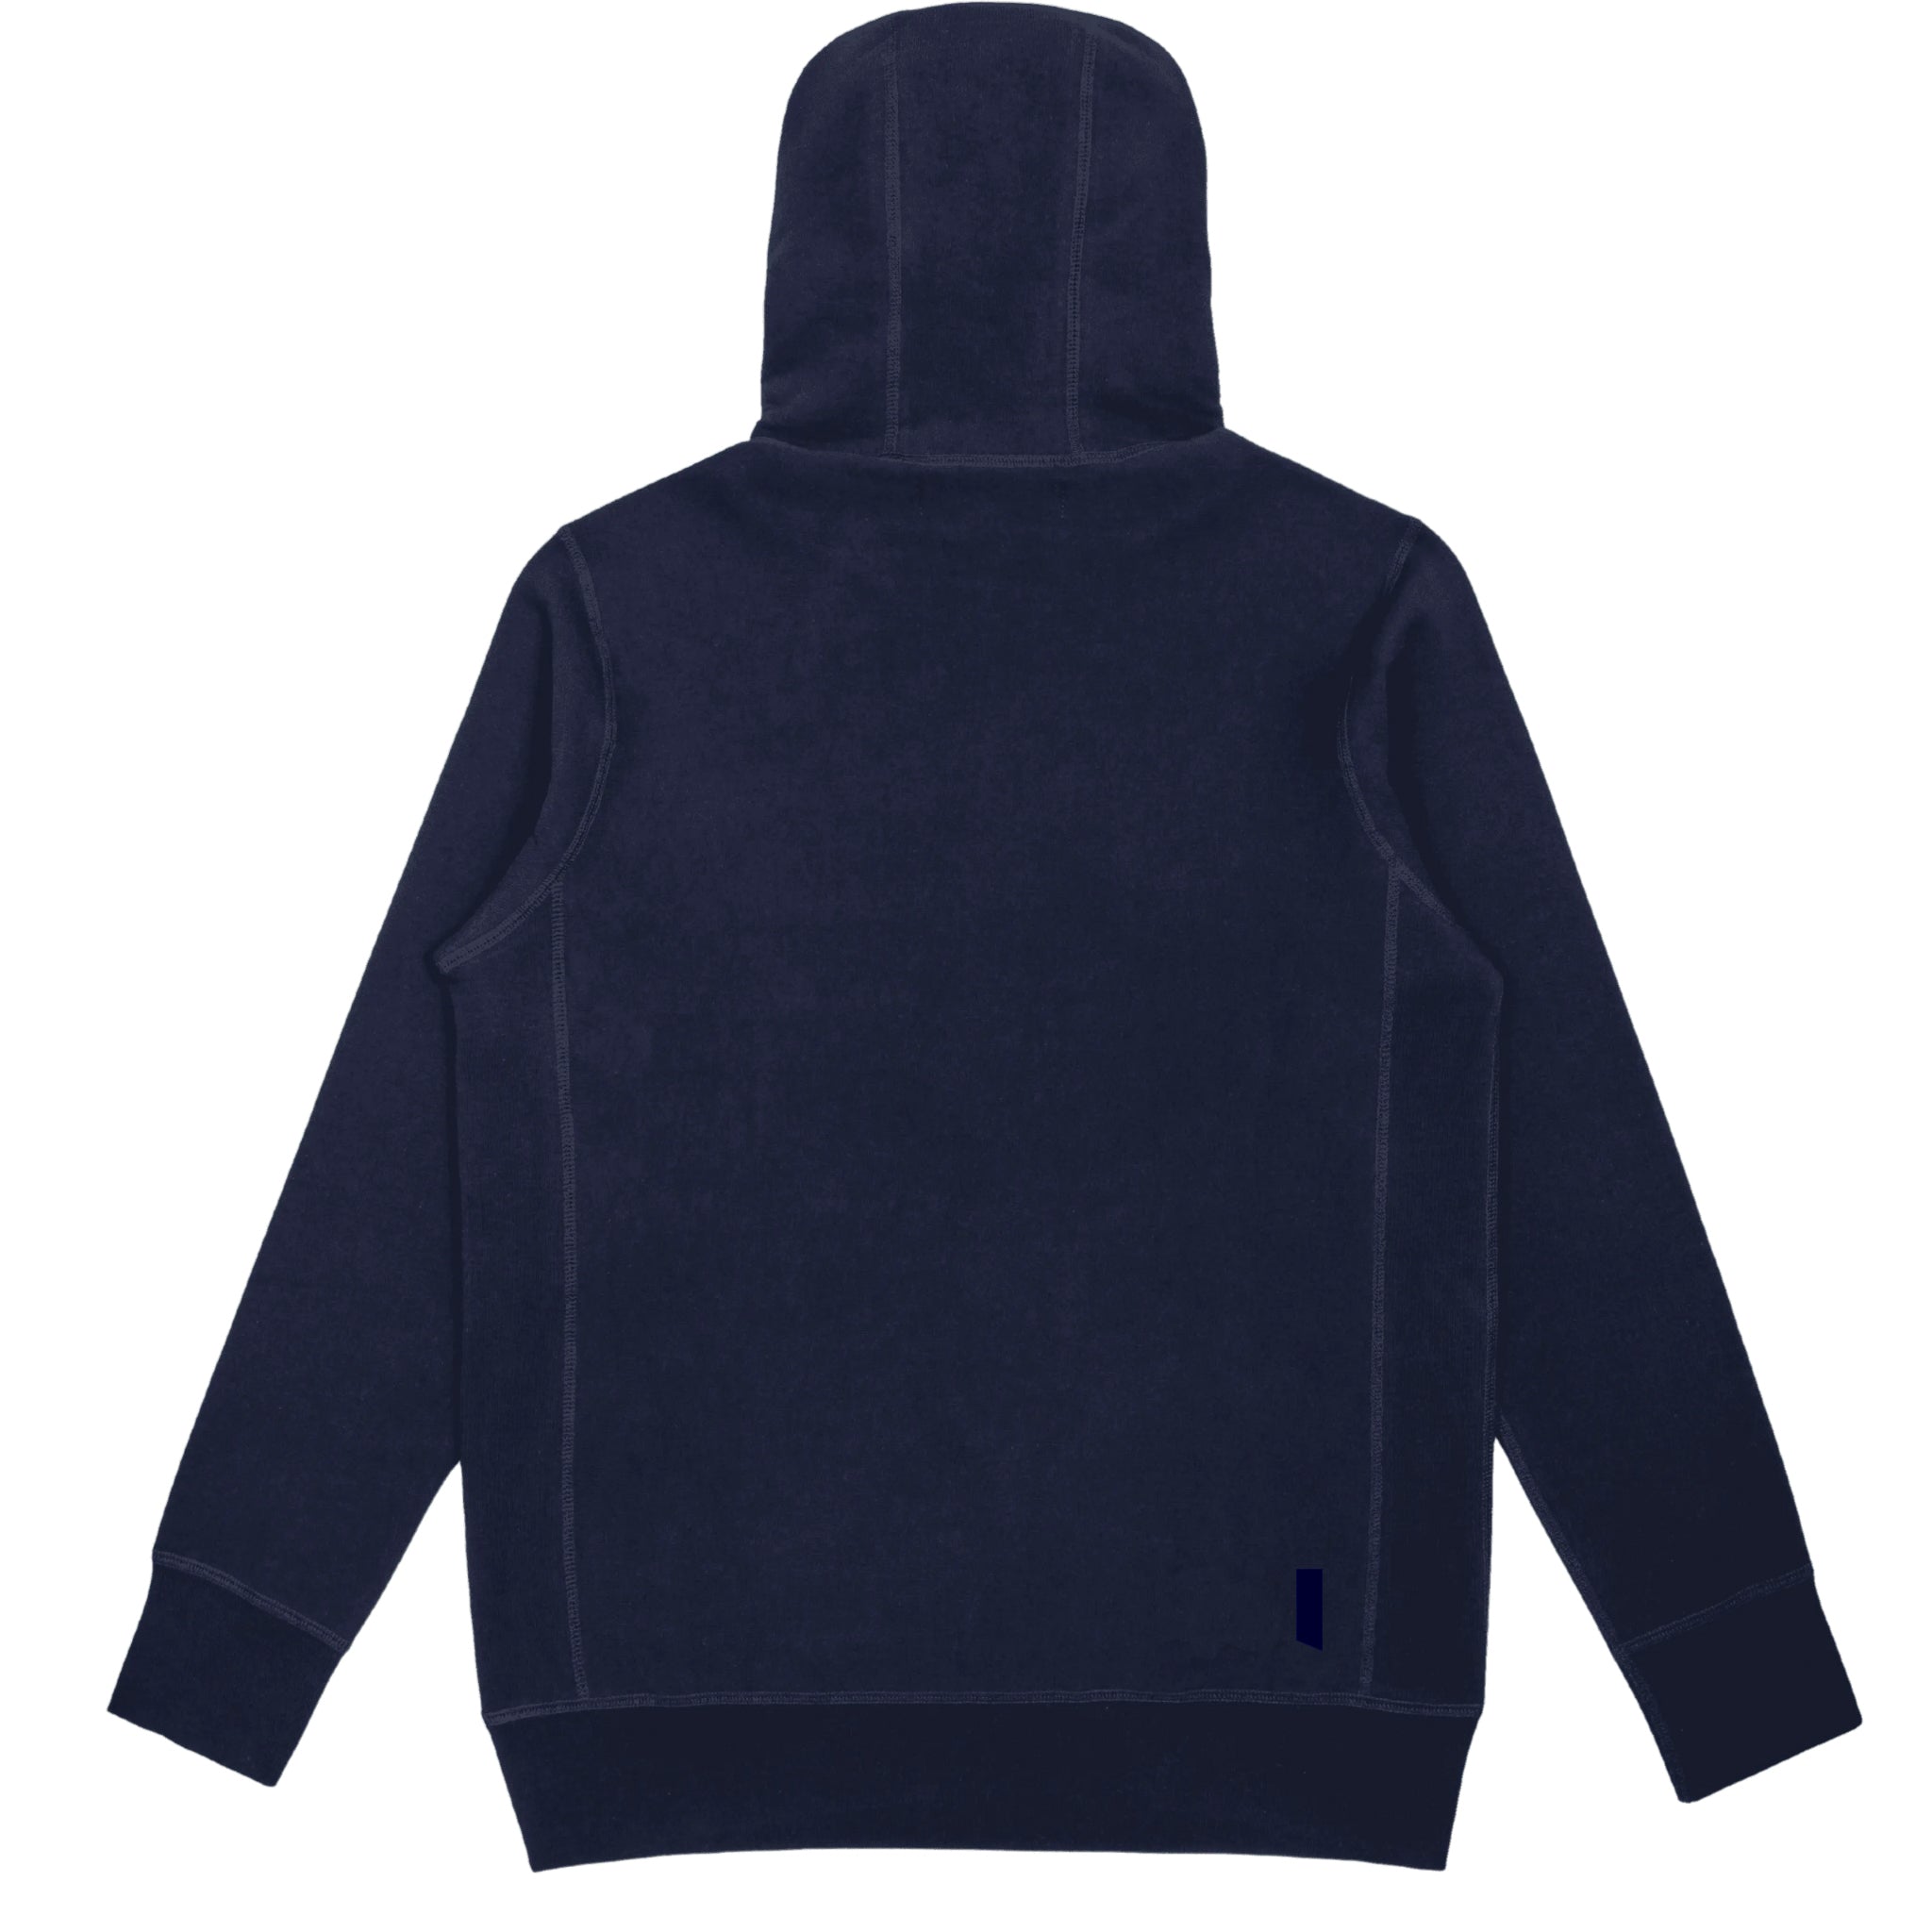 Heavyweight hoodie in blue cotton showing its back the camera on a white background.